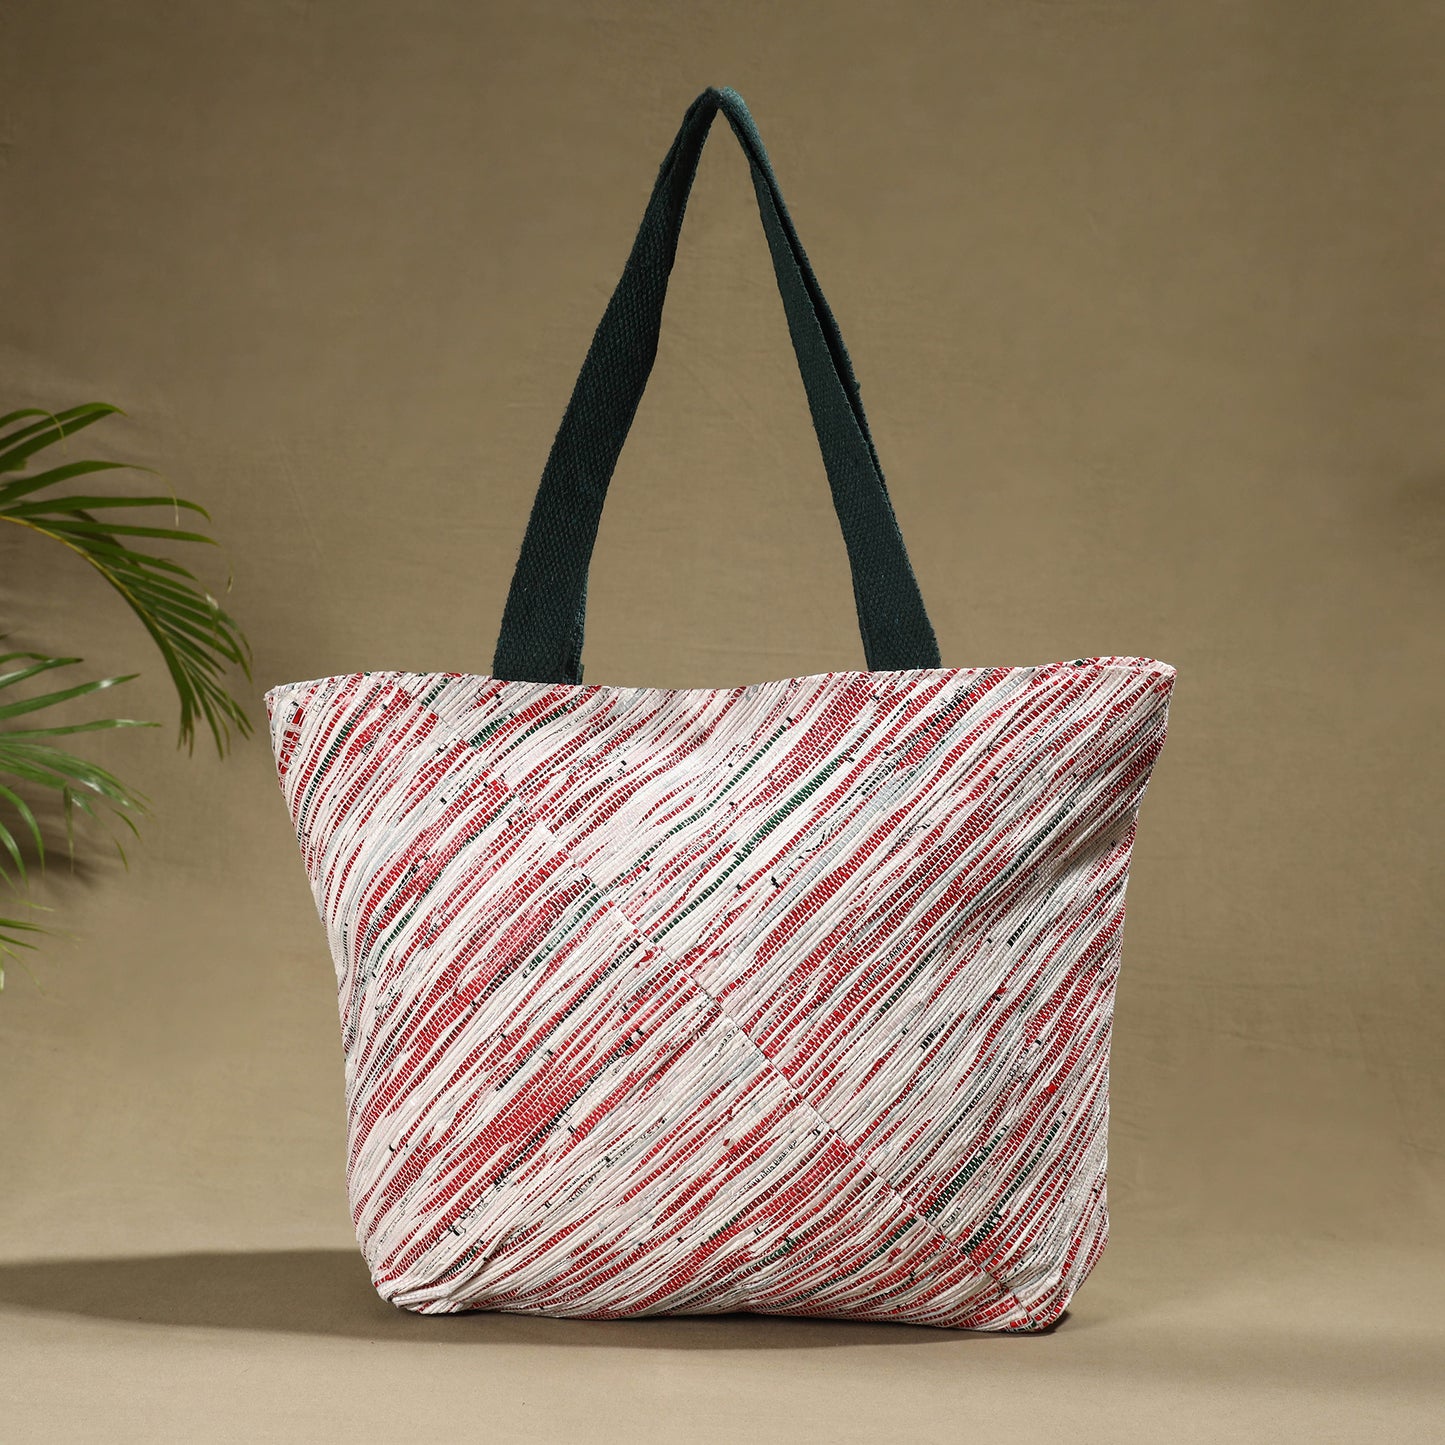 Upcycled Woven Handcrafted Shoulder Bag by Ecokaari